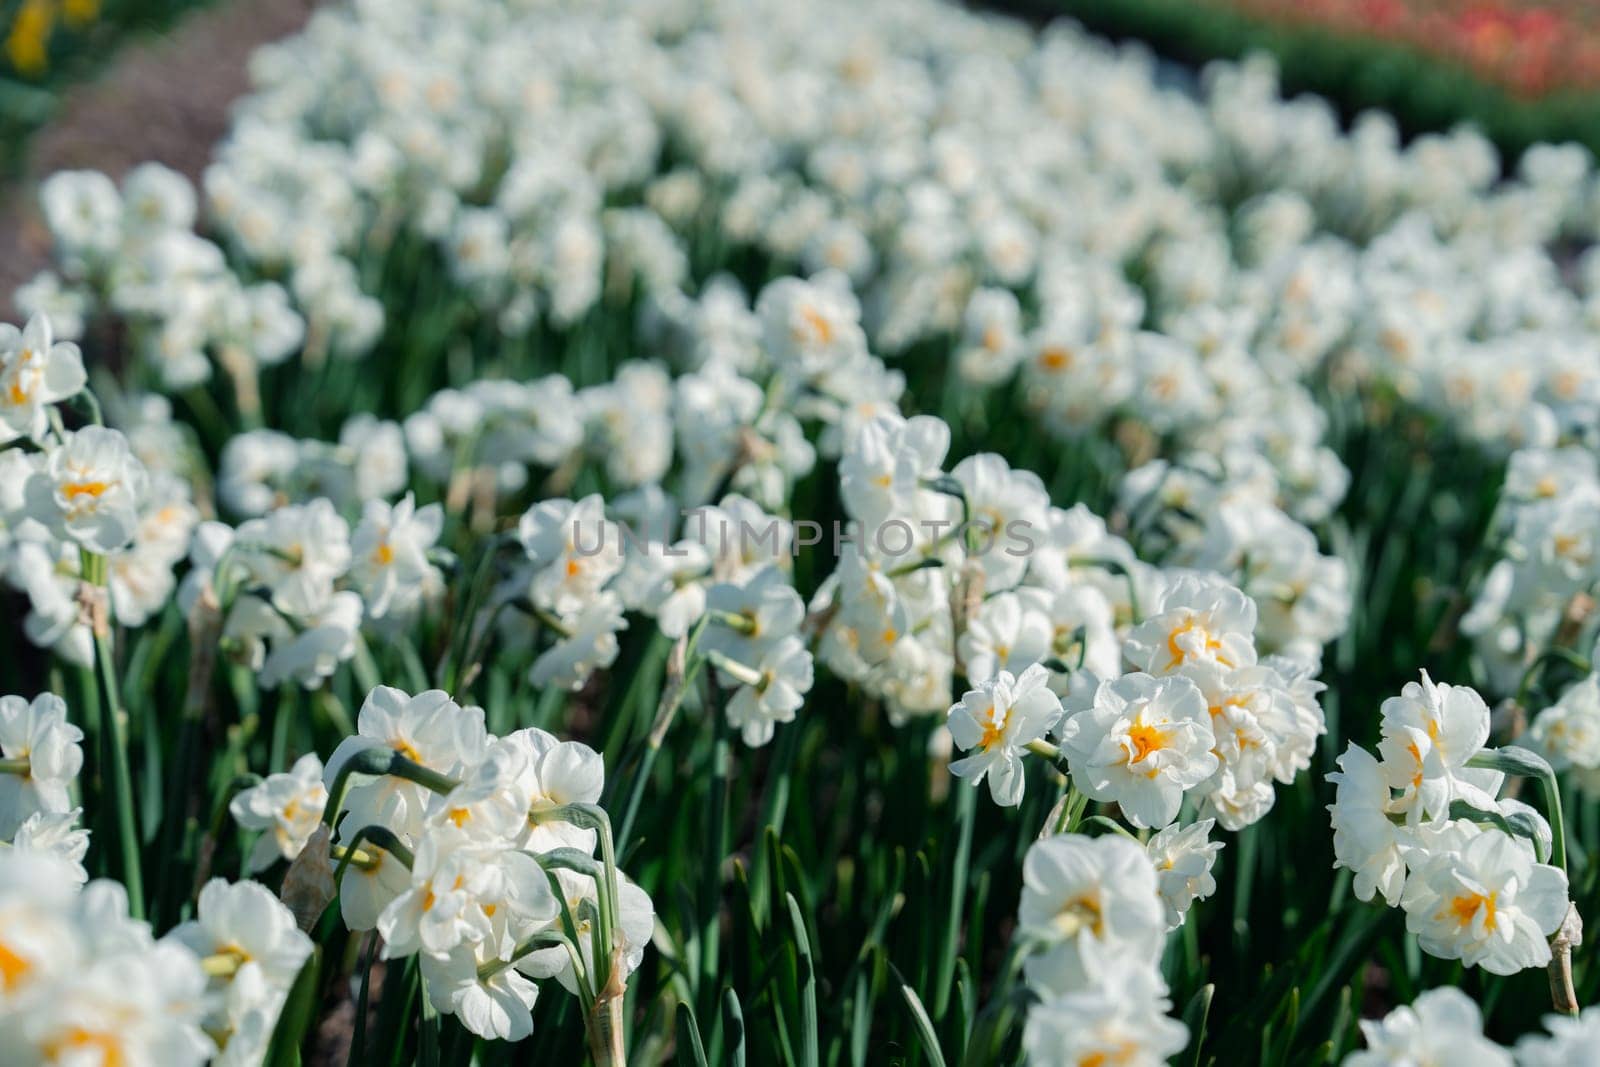 Scenic Dutch Landscape: Charming White Daffodils in Full Bloom by PhotoTime